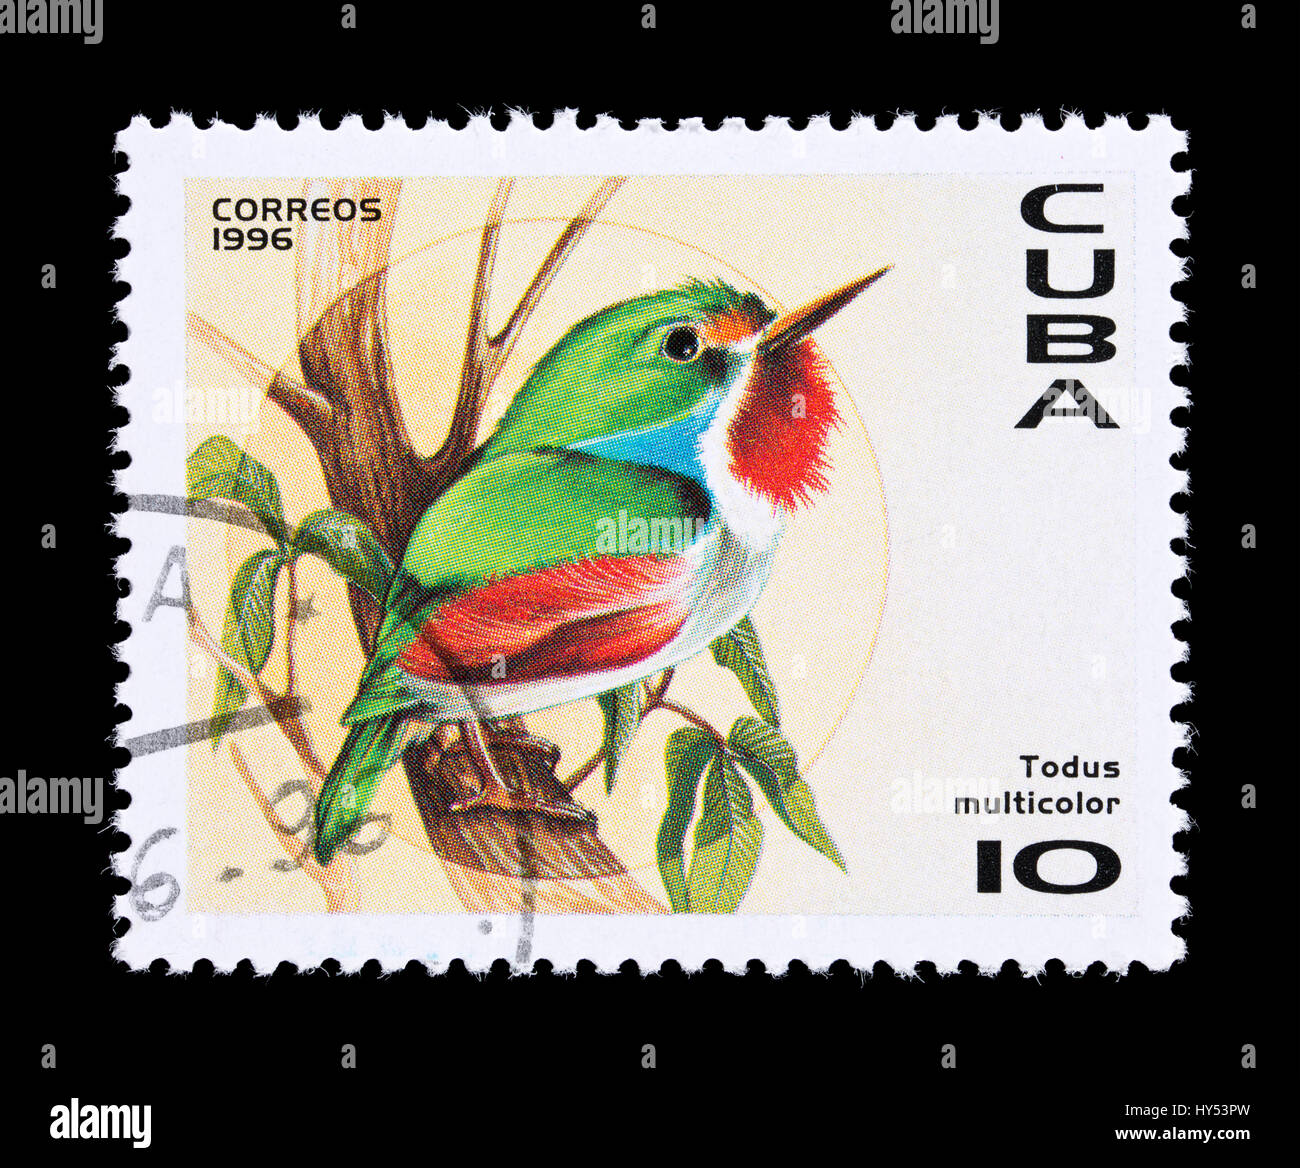 Postage stamp from Cuba depicting a Cuban tody  (Todus multicolor) Stock Photo